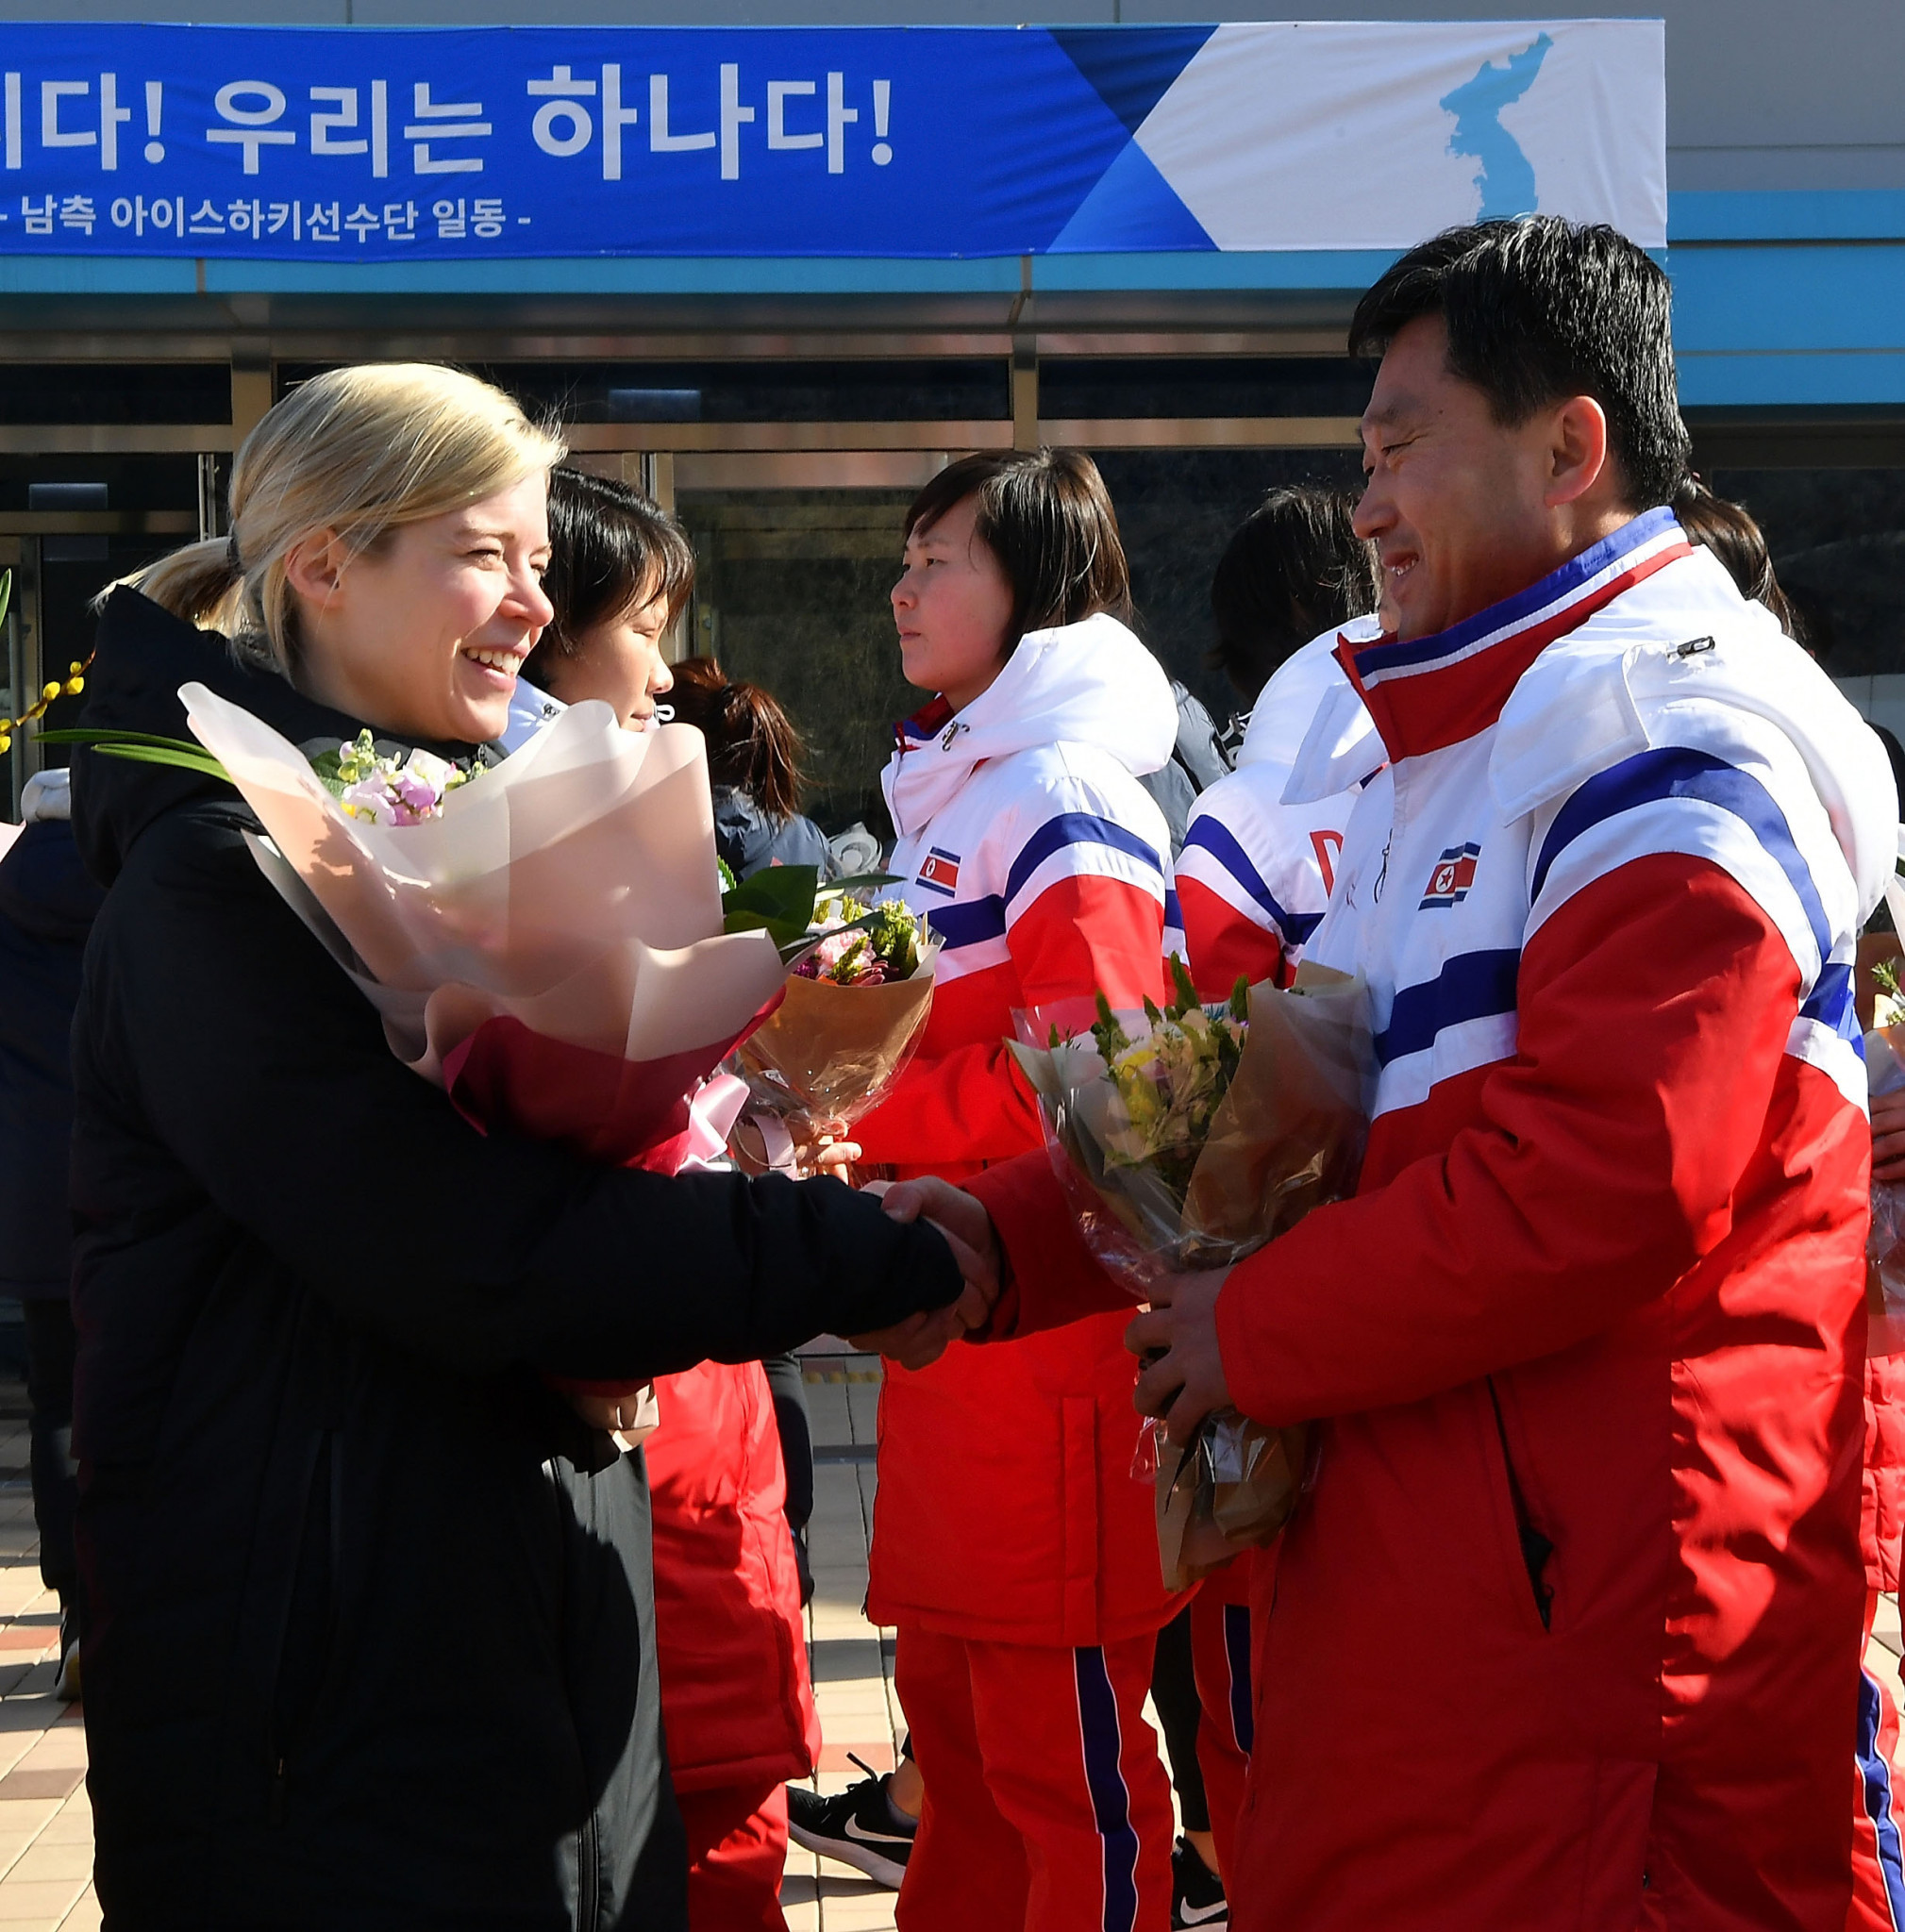 The North Korean delegation was welcomed by the South Korean team, led by coach Sarah Murray ©Getty Images